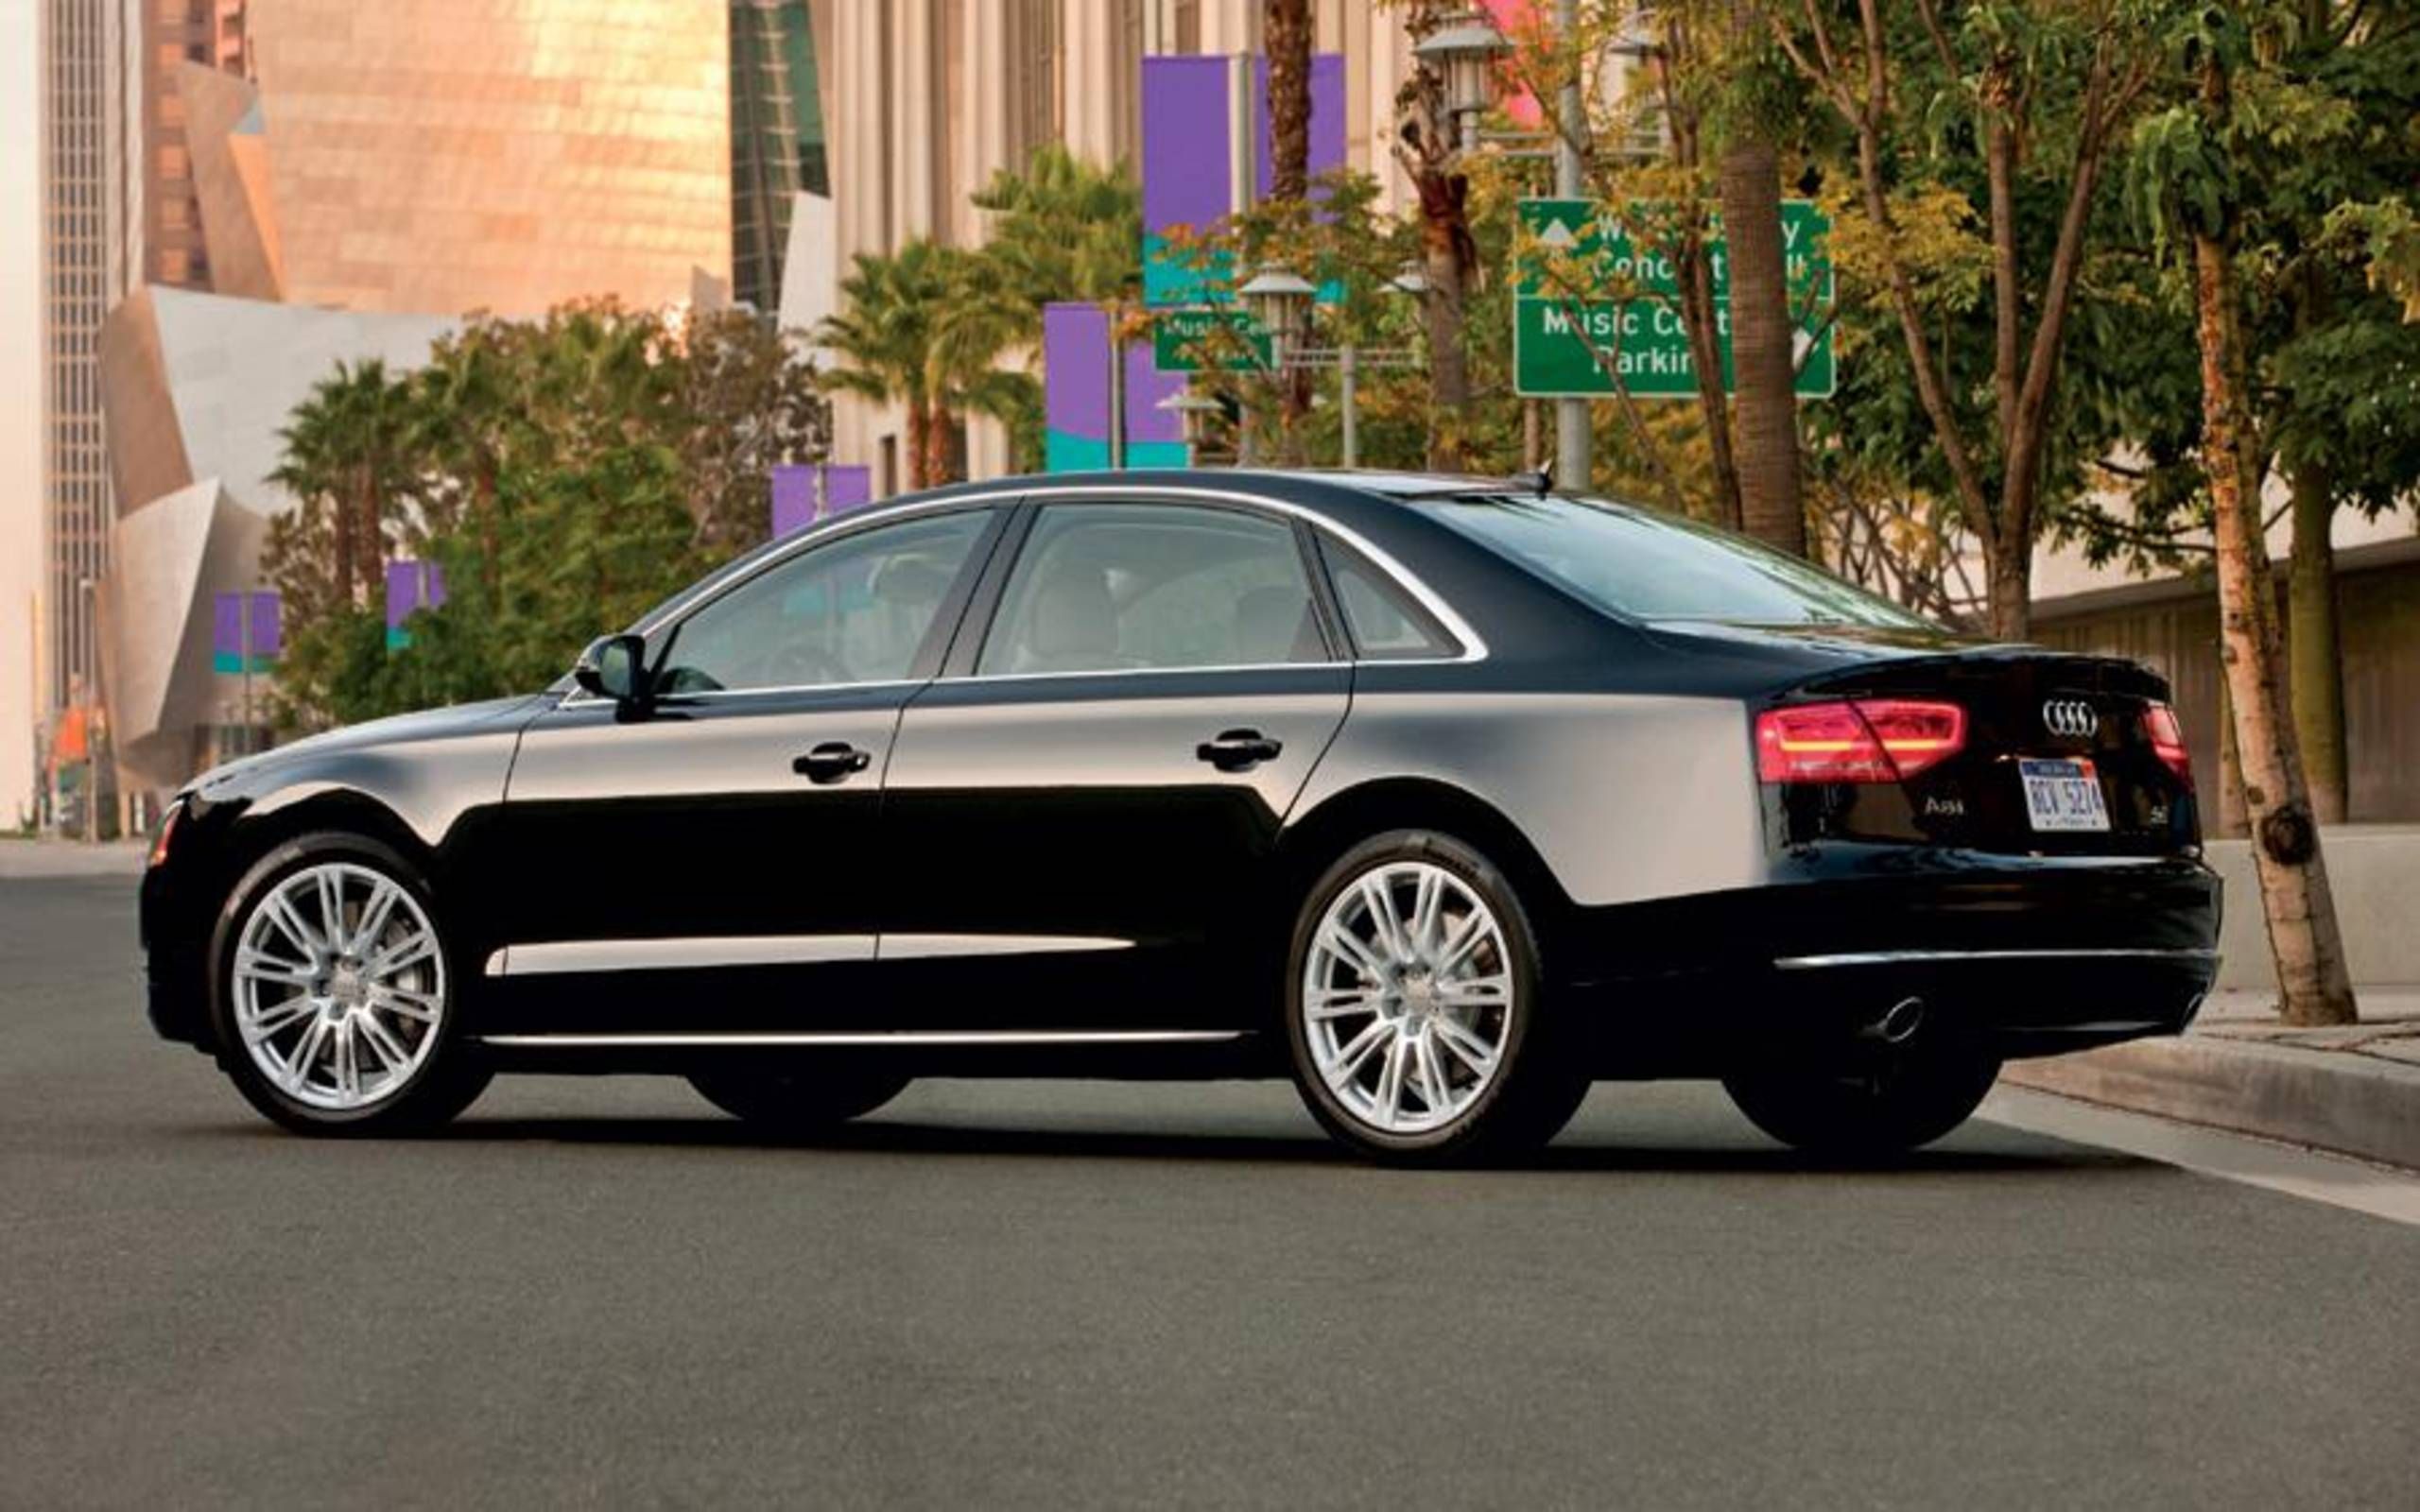 2012 Audi A8 L 4.2 FSI review notes: Differing opinions about Audi's  flagship sedan